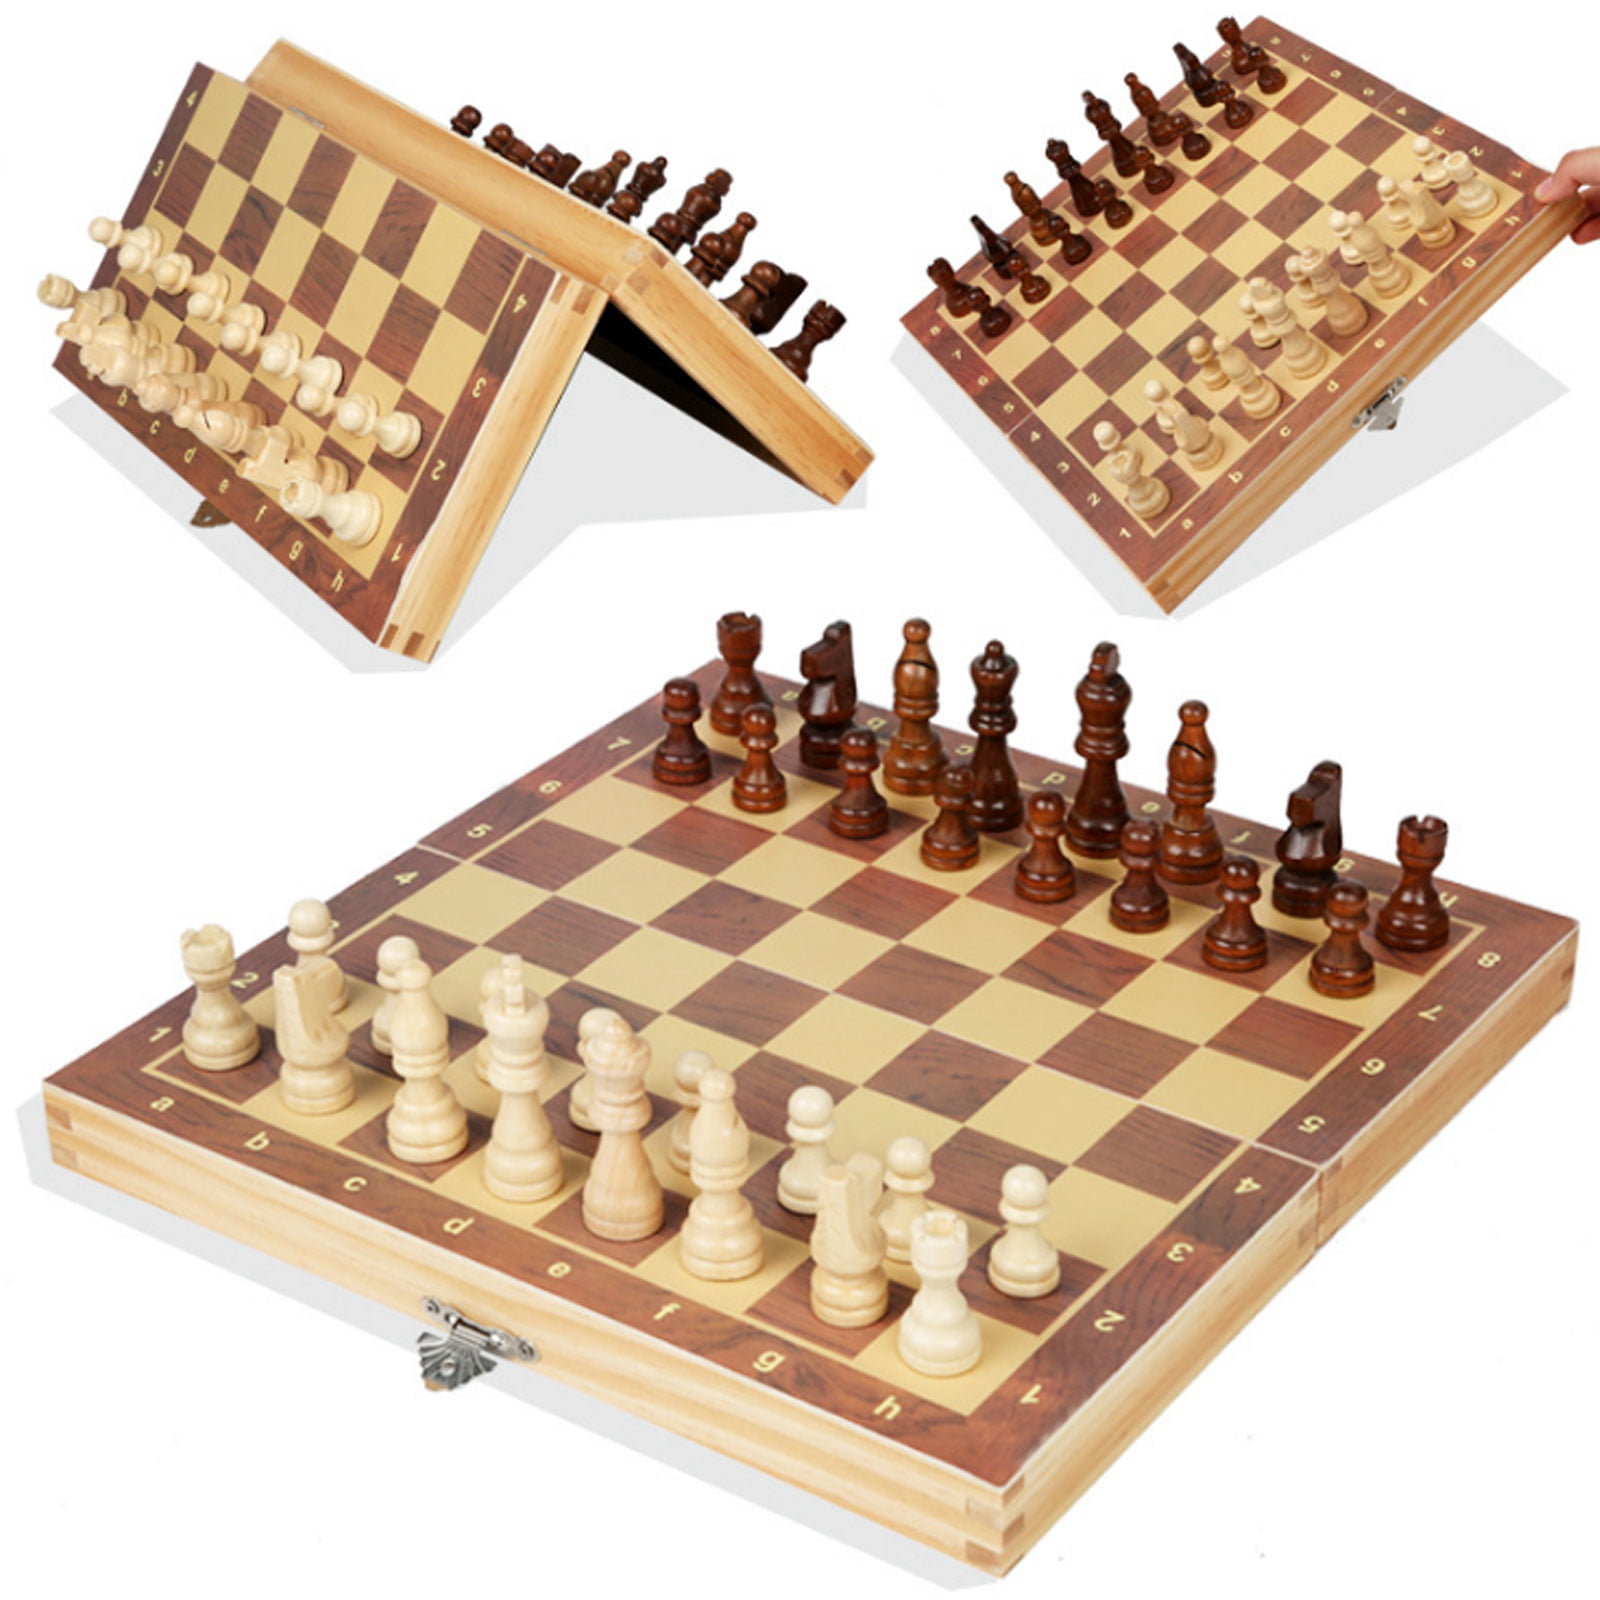 Portable folding Chess Wooden Set Folding Chessboard Pieces Wood Board New Game 